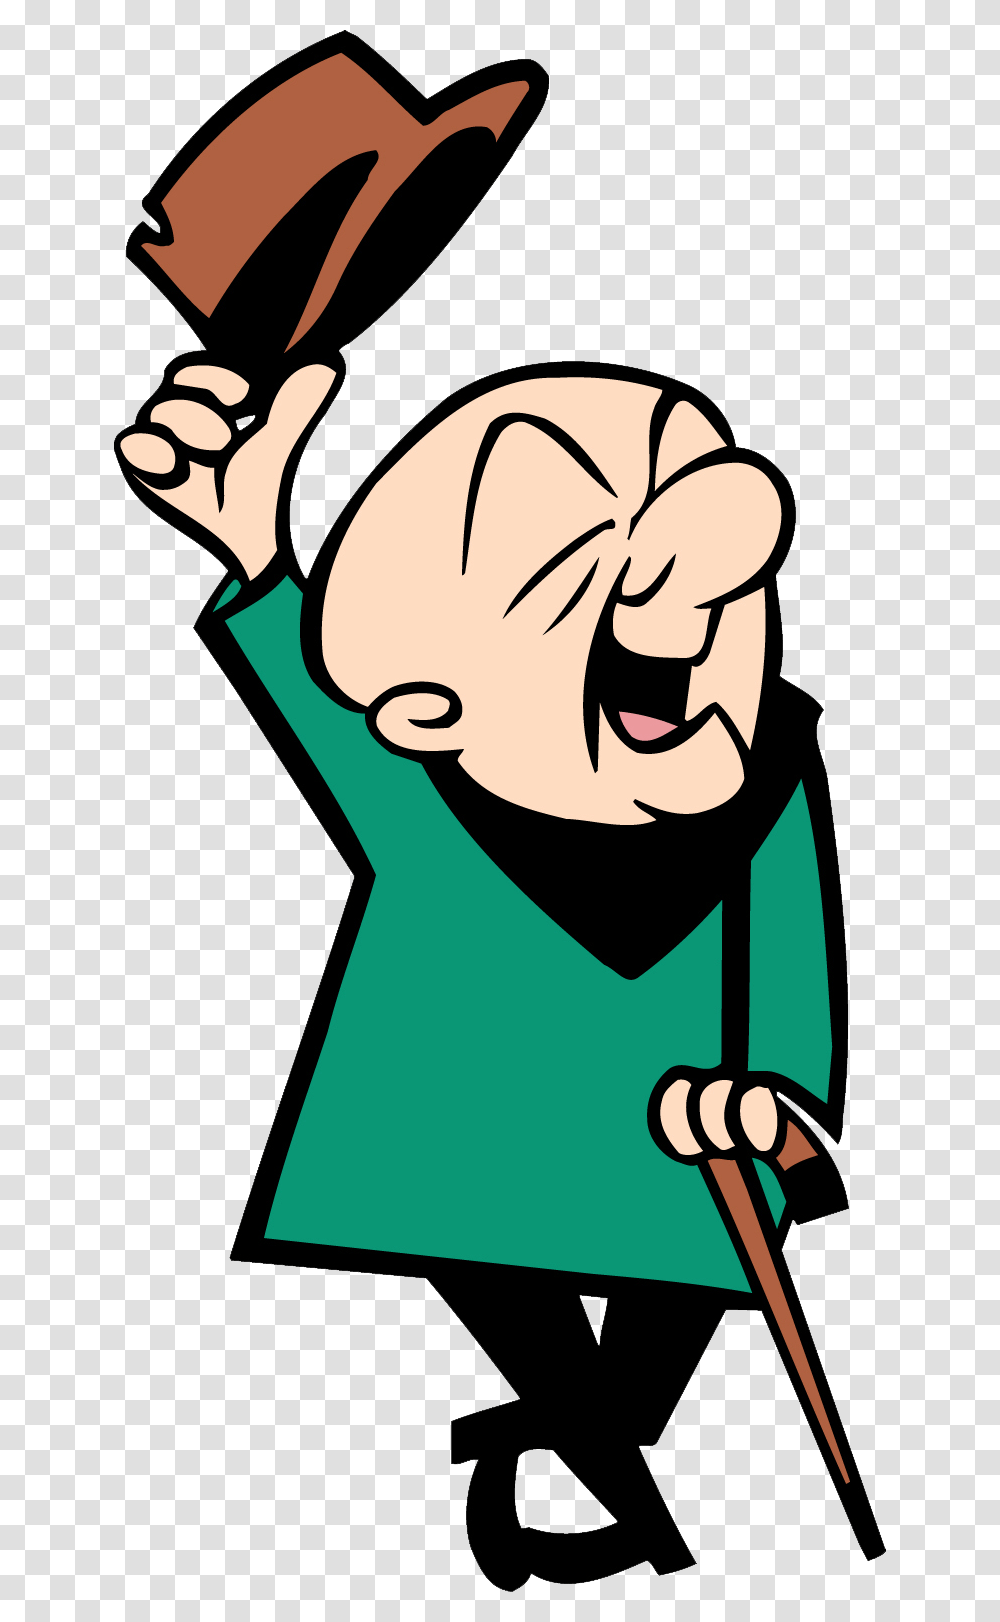 Mrmagoo Ftestickers Cartoon Character Freetoedit Old Cartoon Characters Male, Face, Hand, Poster Transparent Png